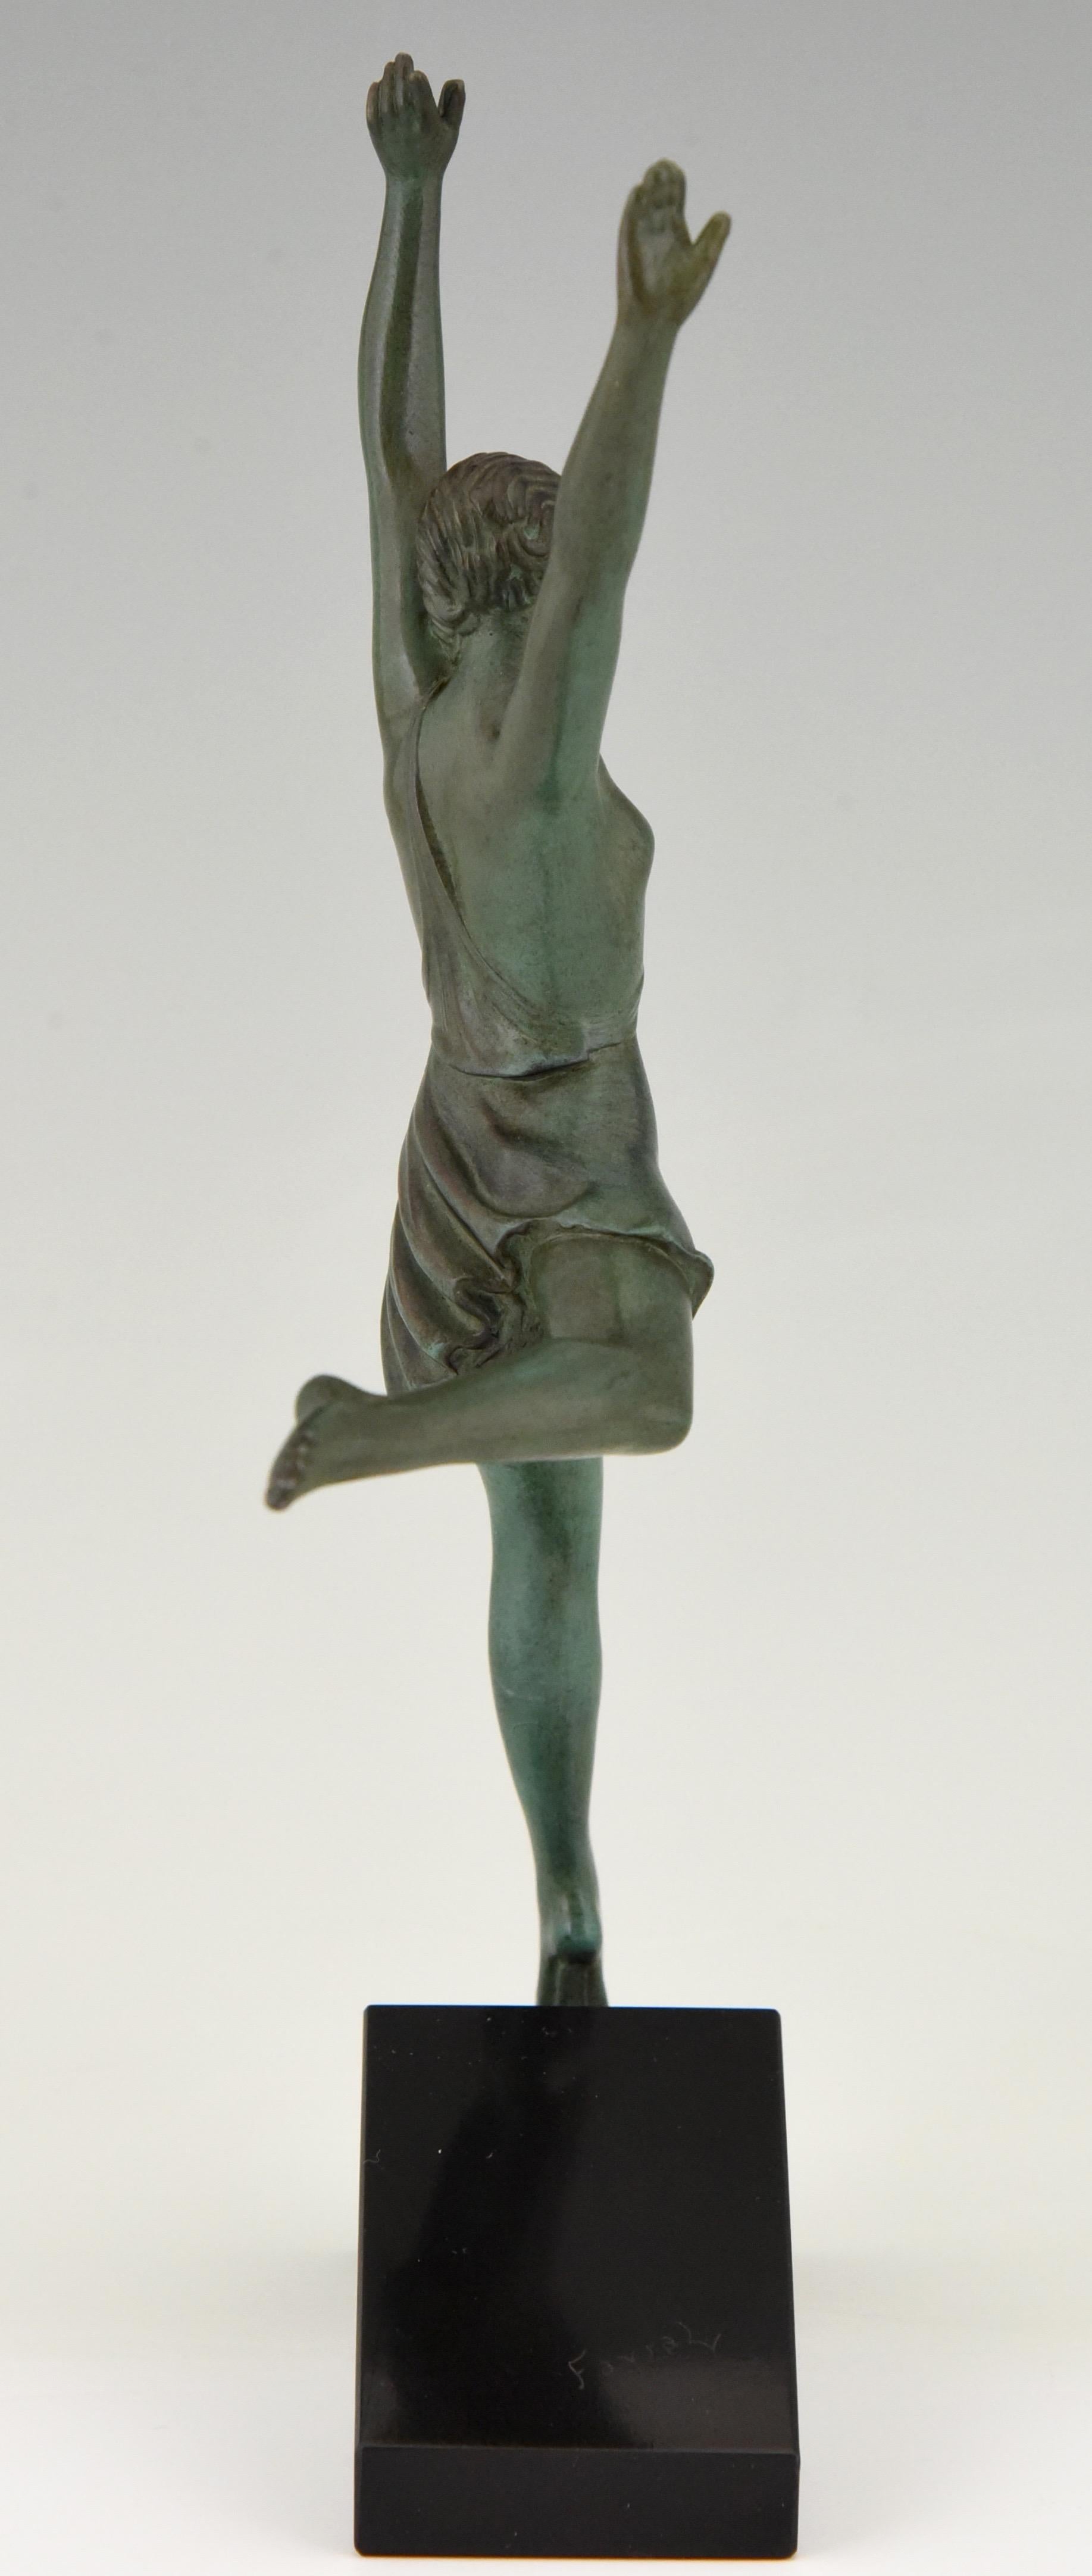 Metal Olympe Art Deco Sculpture Running Woman Fayral Pierre Le Faguays, France, 1930